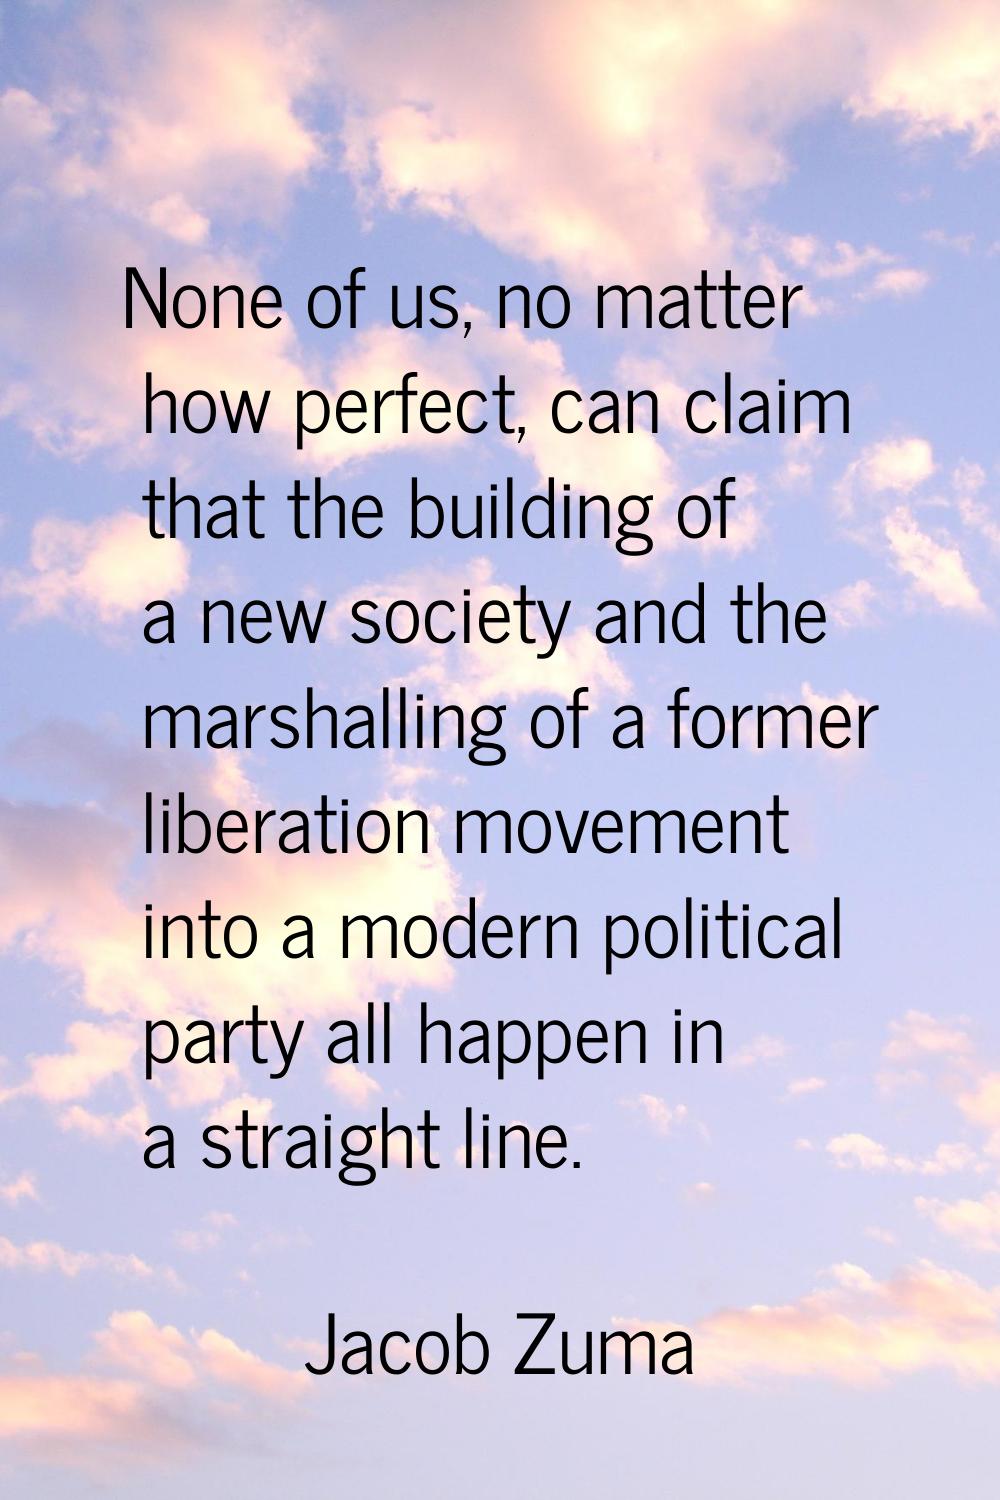 None of us, no matter how perfect, can claim that the building of a new society and the marshalling